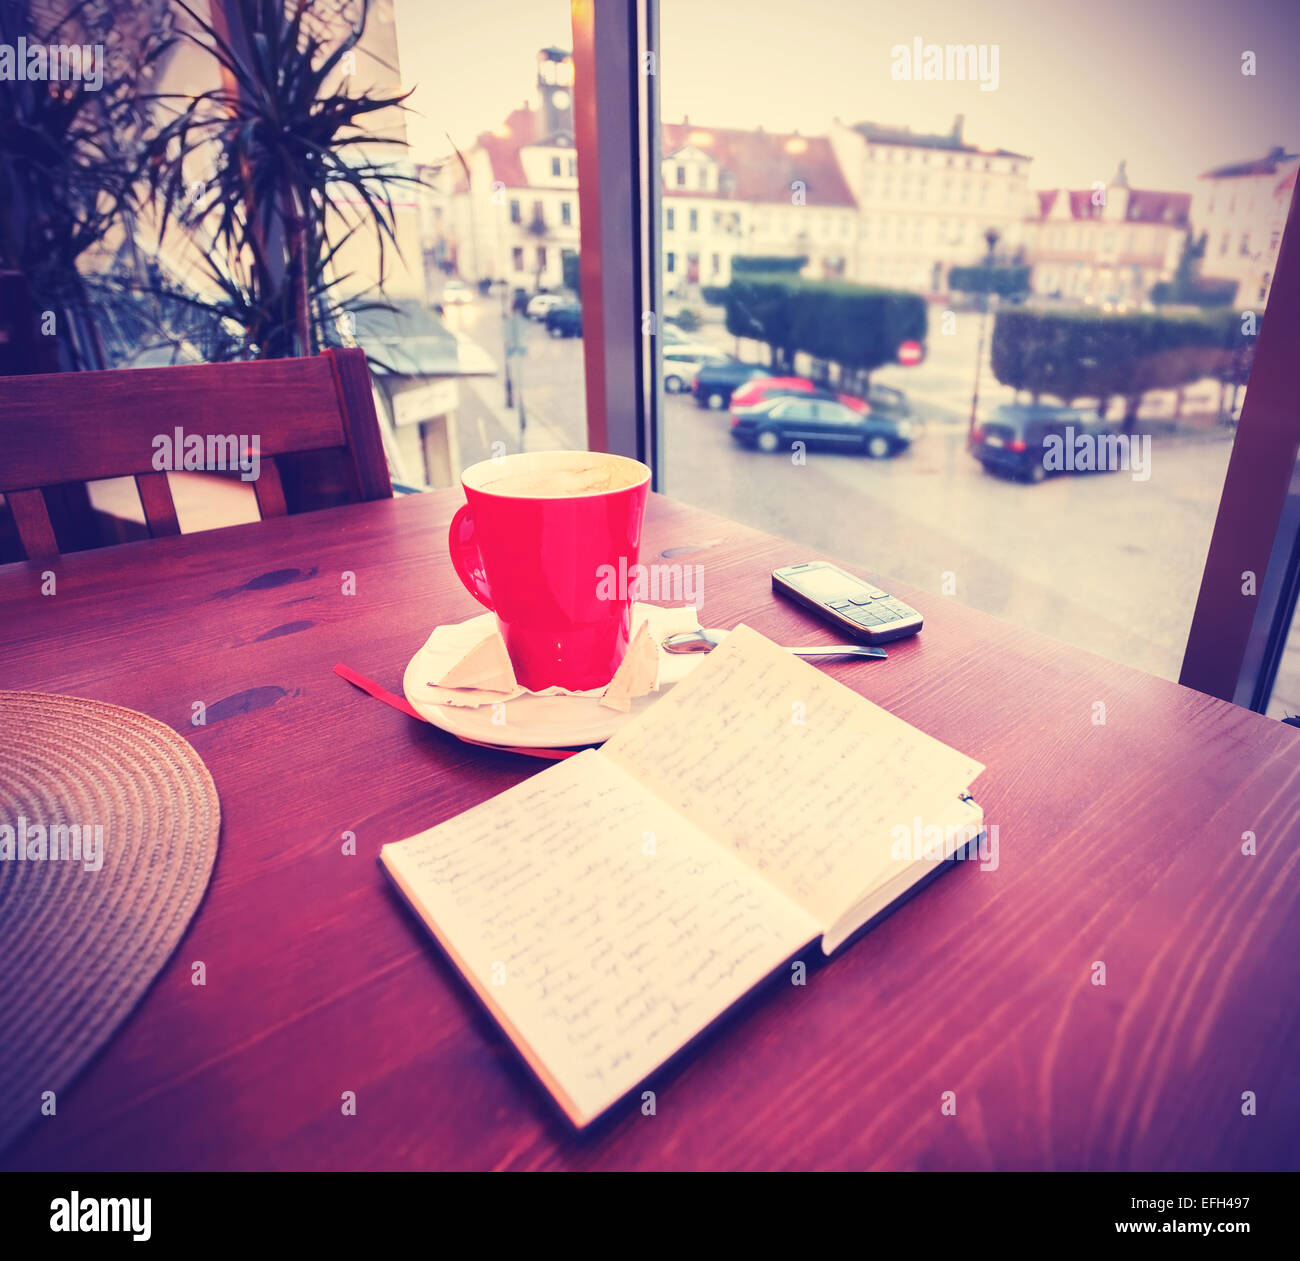 Vintage instagram like toned coffee cup and diary in coffee shop. Stock Photo